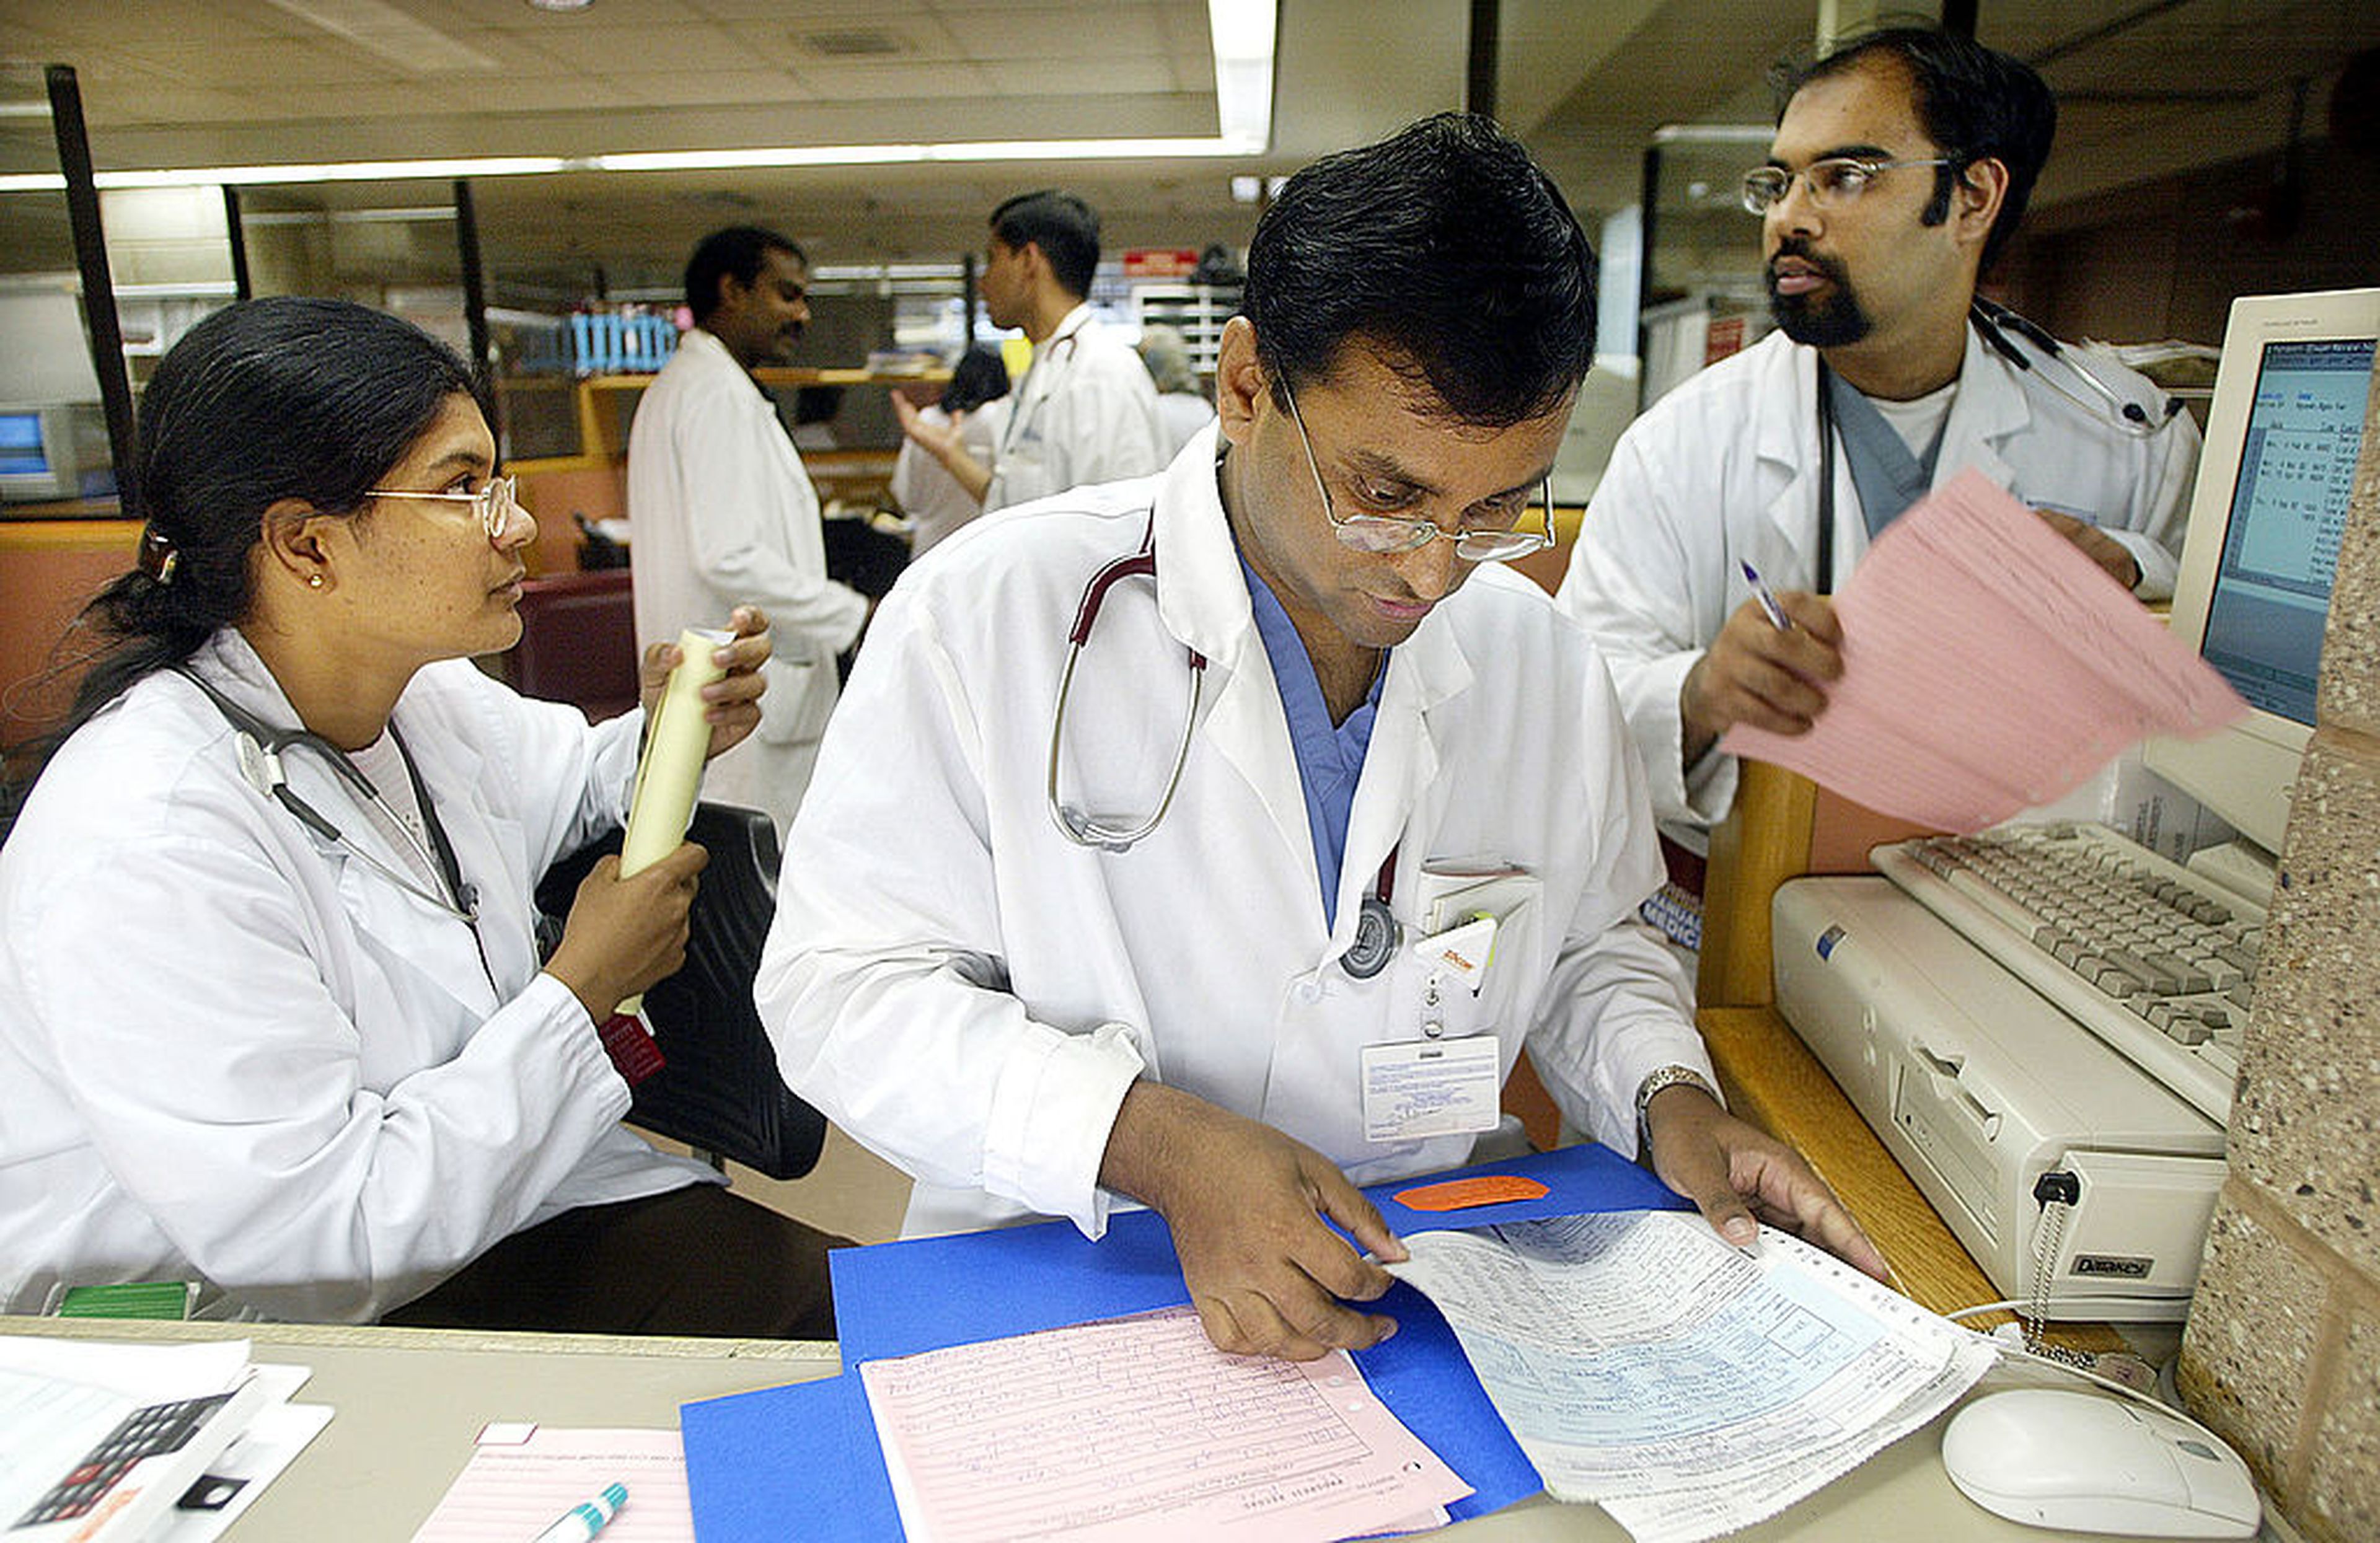 Doctors prepare paperwork in the physician consultation area of the emergency room at Coney Island Hospital Sept. 5, 2002, in New York City. (Photo by Mario Tama/Getty Images)